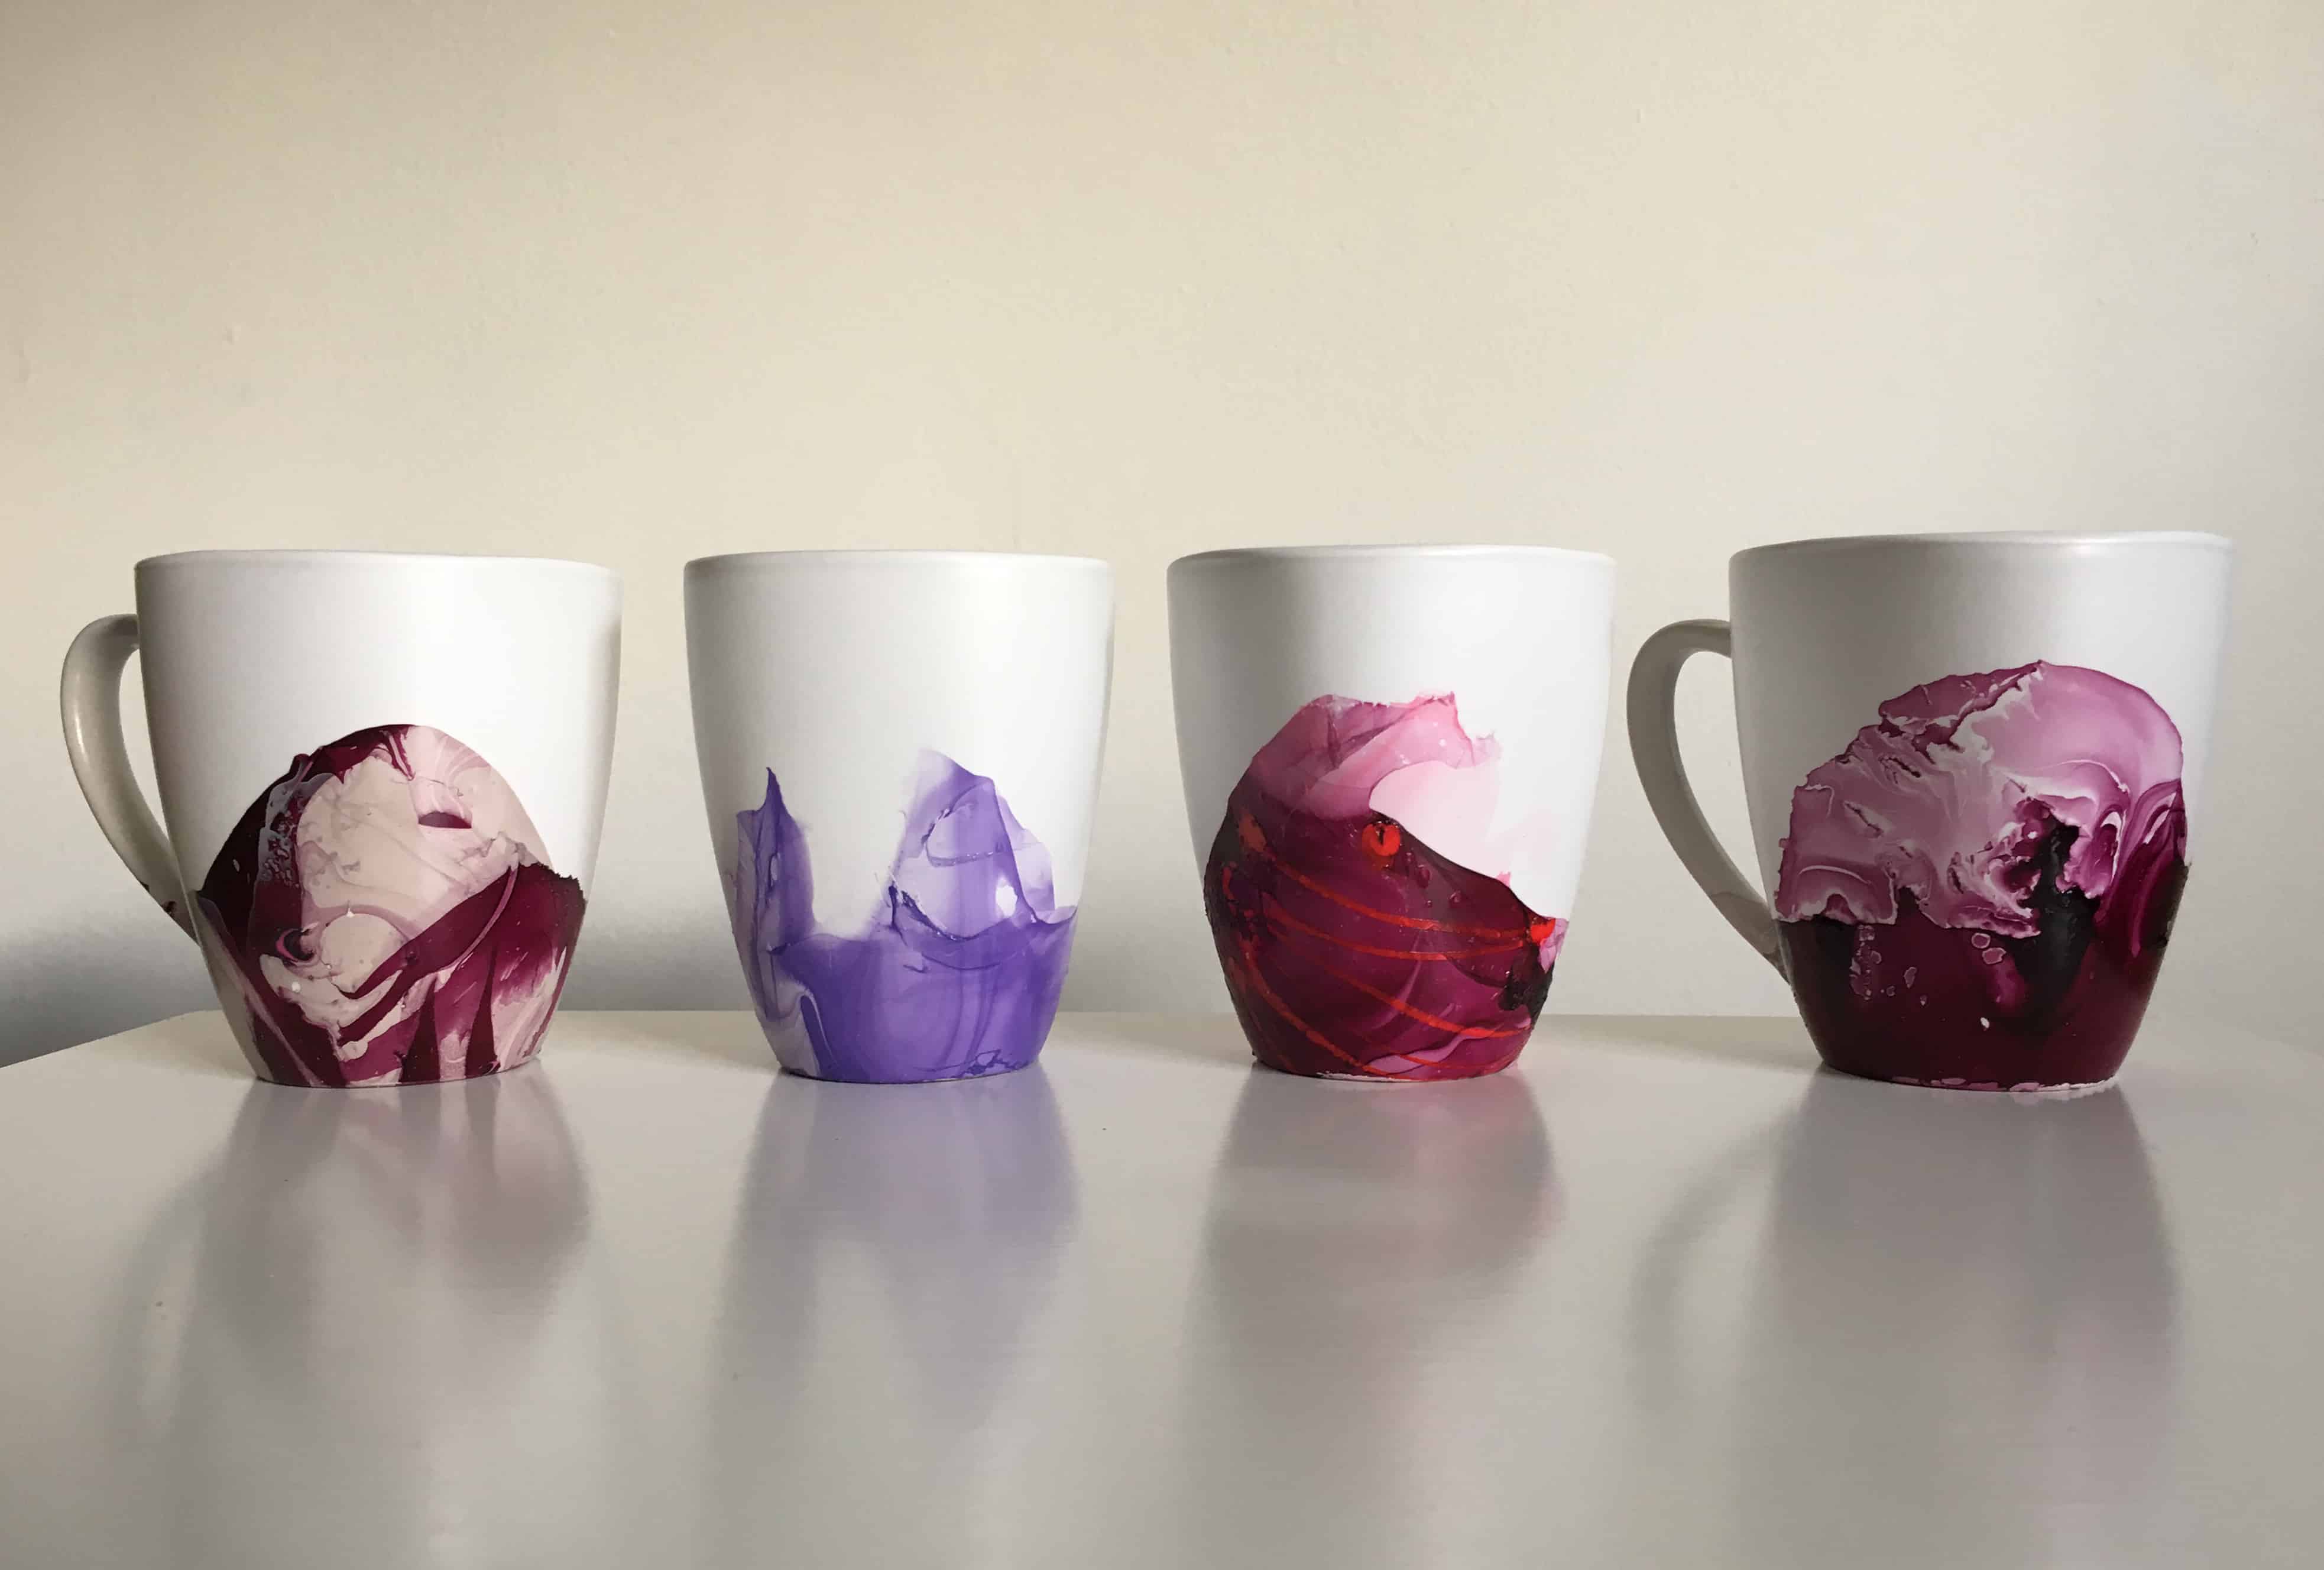 24 DIY Christmas Gifts That Your Friends Would Love To Get This Year | Handmade Christmas Gift Ideas | Inexpensive DIY Gift Ideas | Christmas Gift Ideas | Best Handmade Gifts Via: https://themummyfront.com #diychristmasgifts #themummyfront #handmadegifts | DIY Marbled Mugs